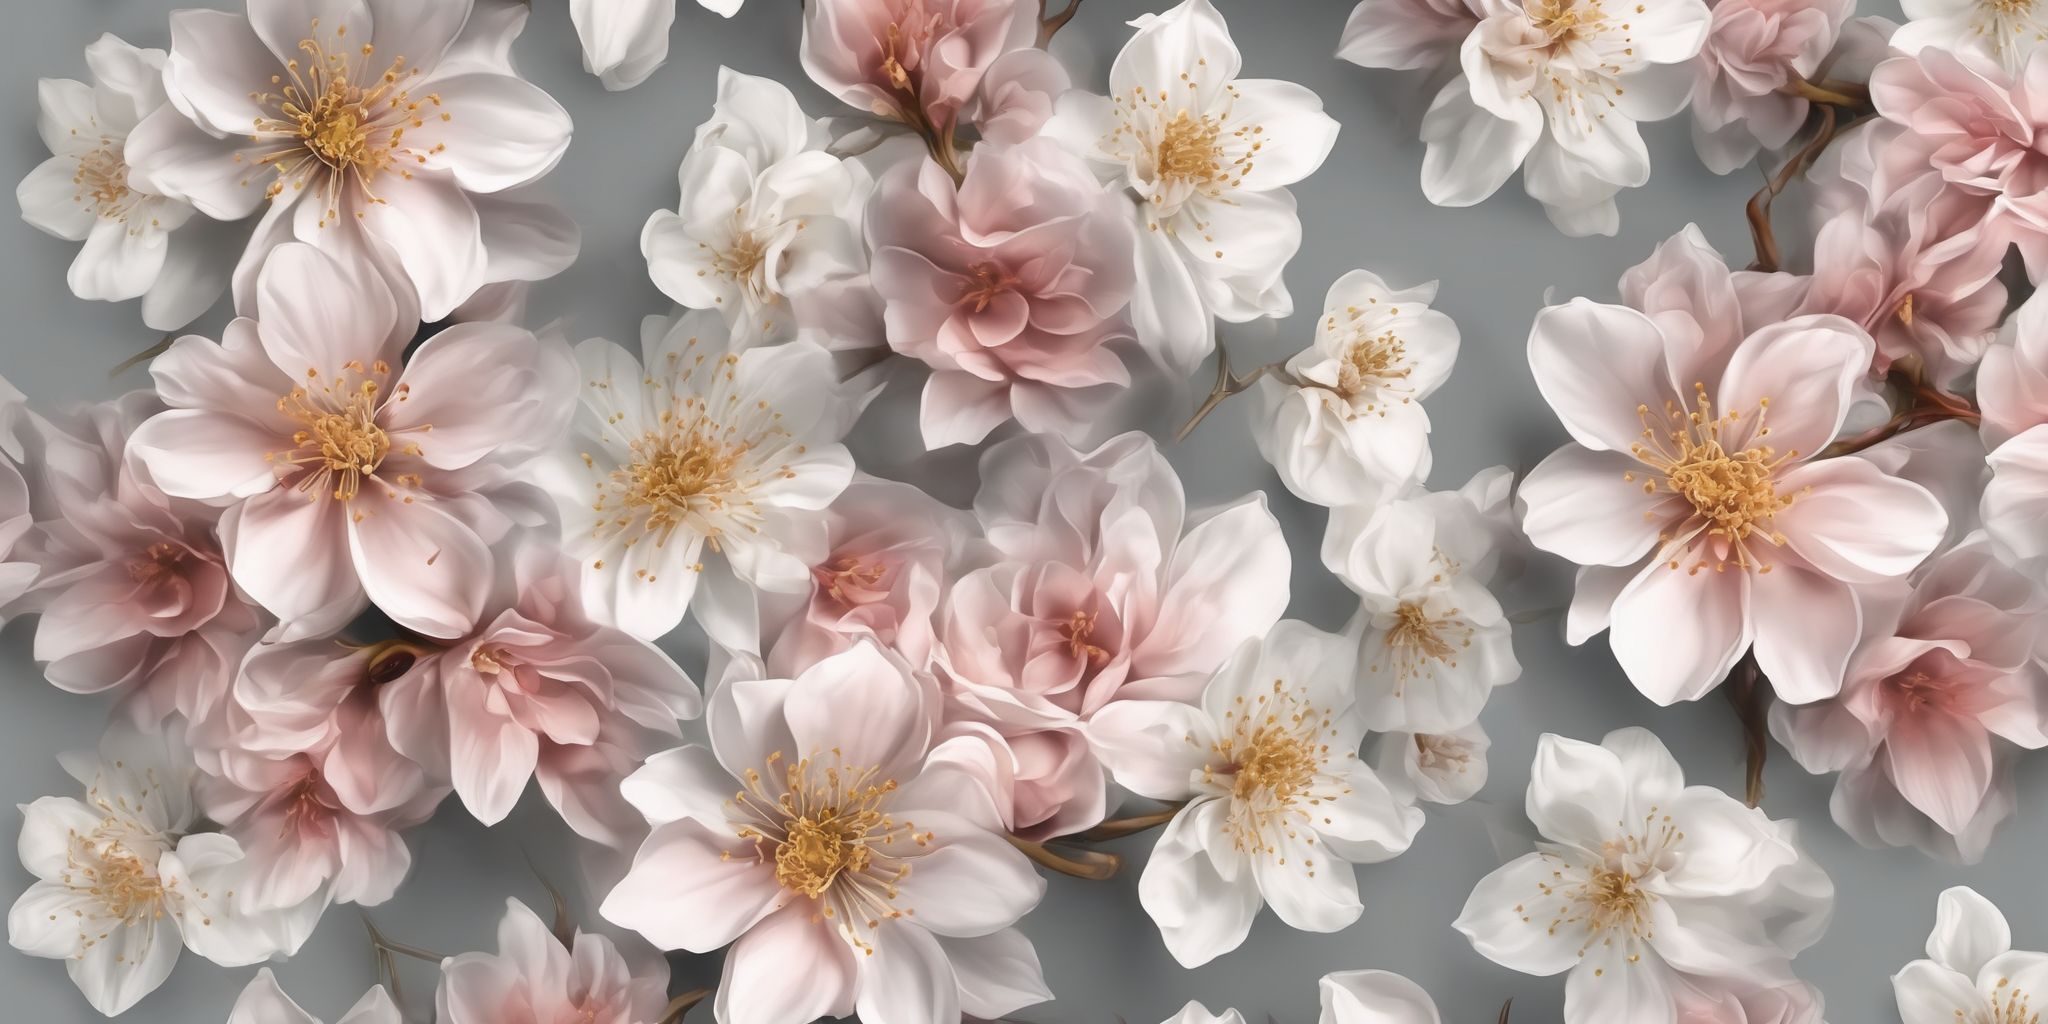 Blossoming flower  in realistic, photographic style